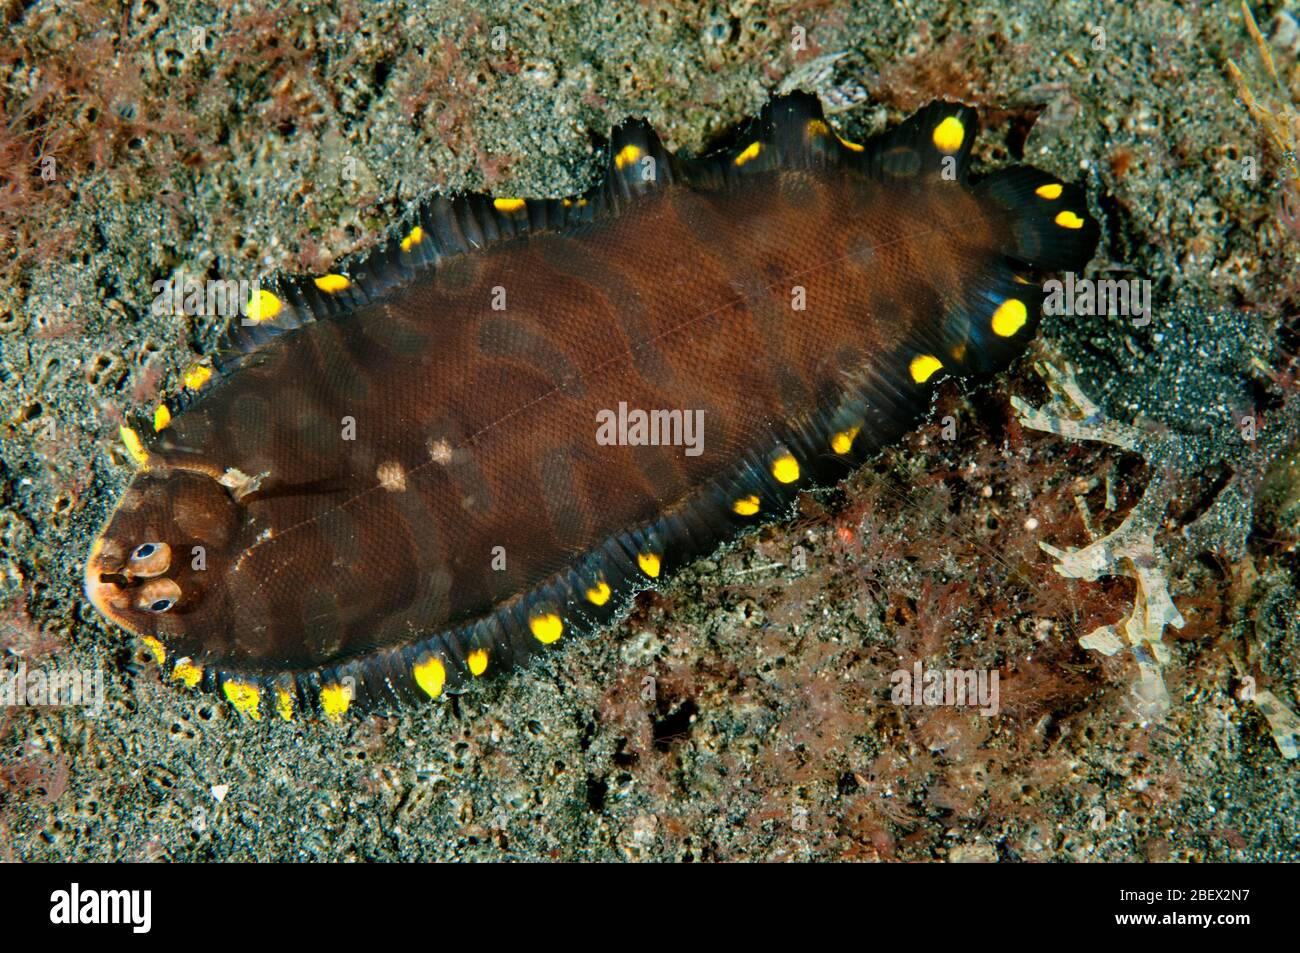 Undescribed sole, Soleichthys sp., Sulawesi Indonesia. Stock Photo